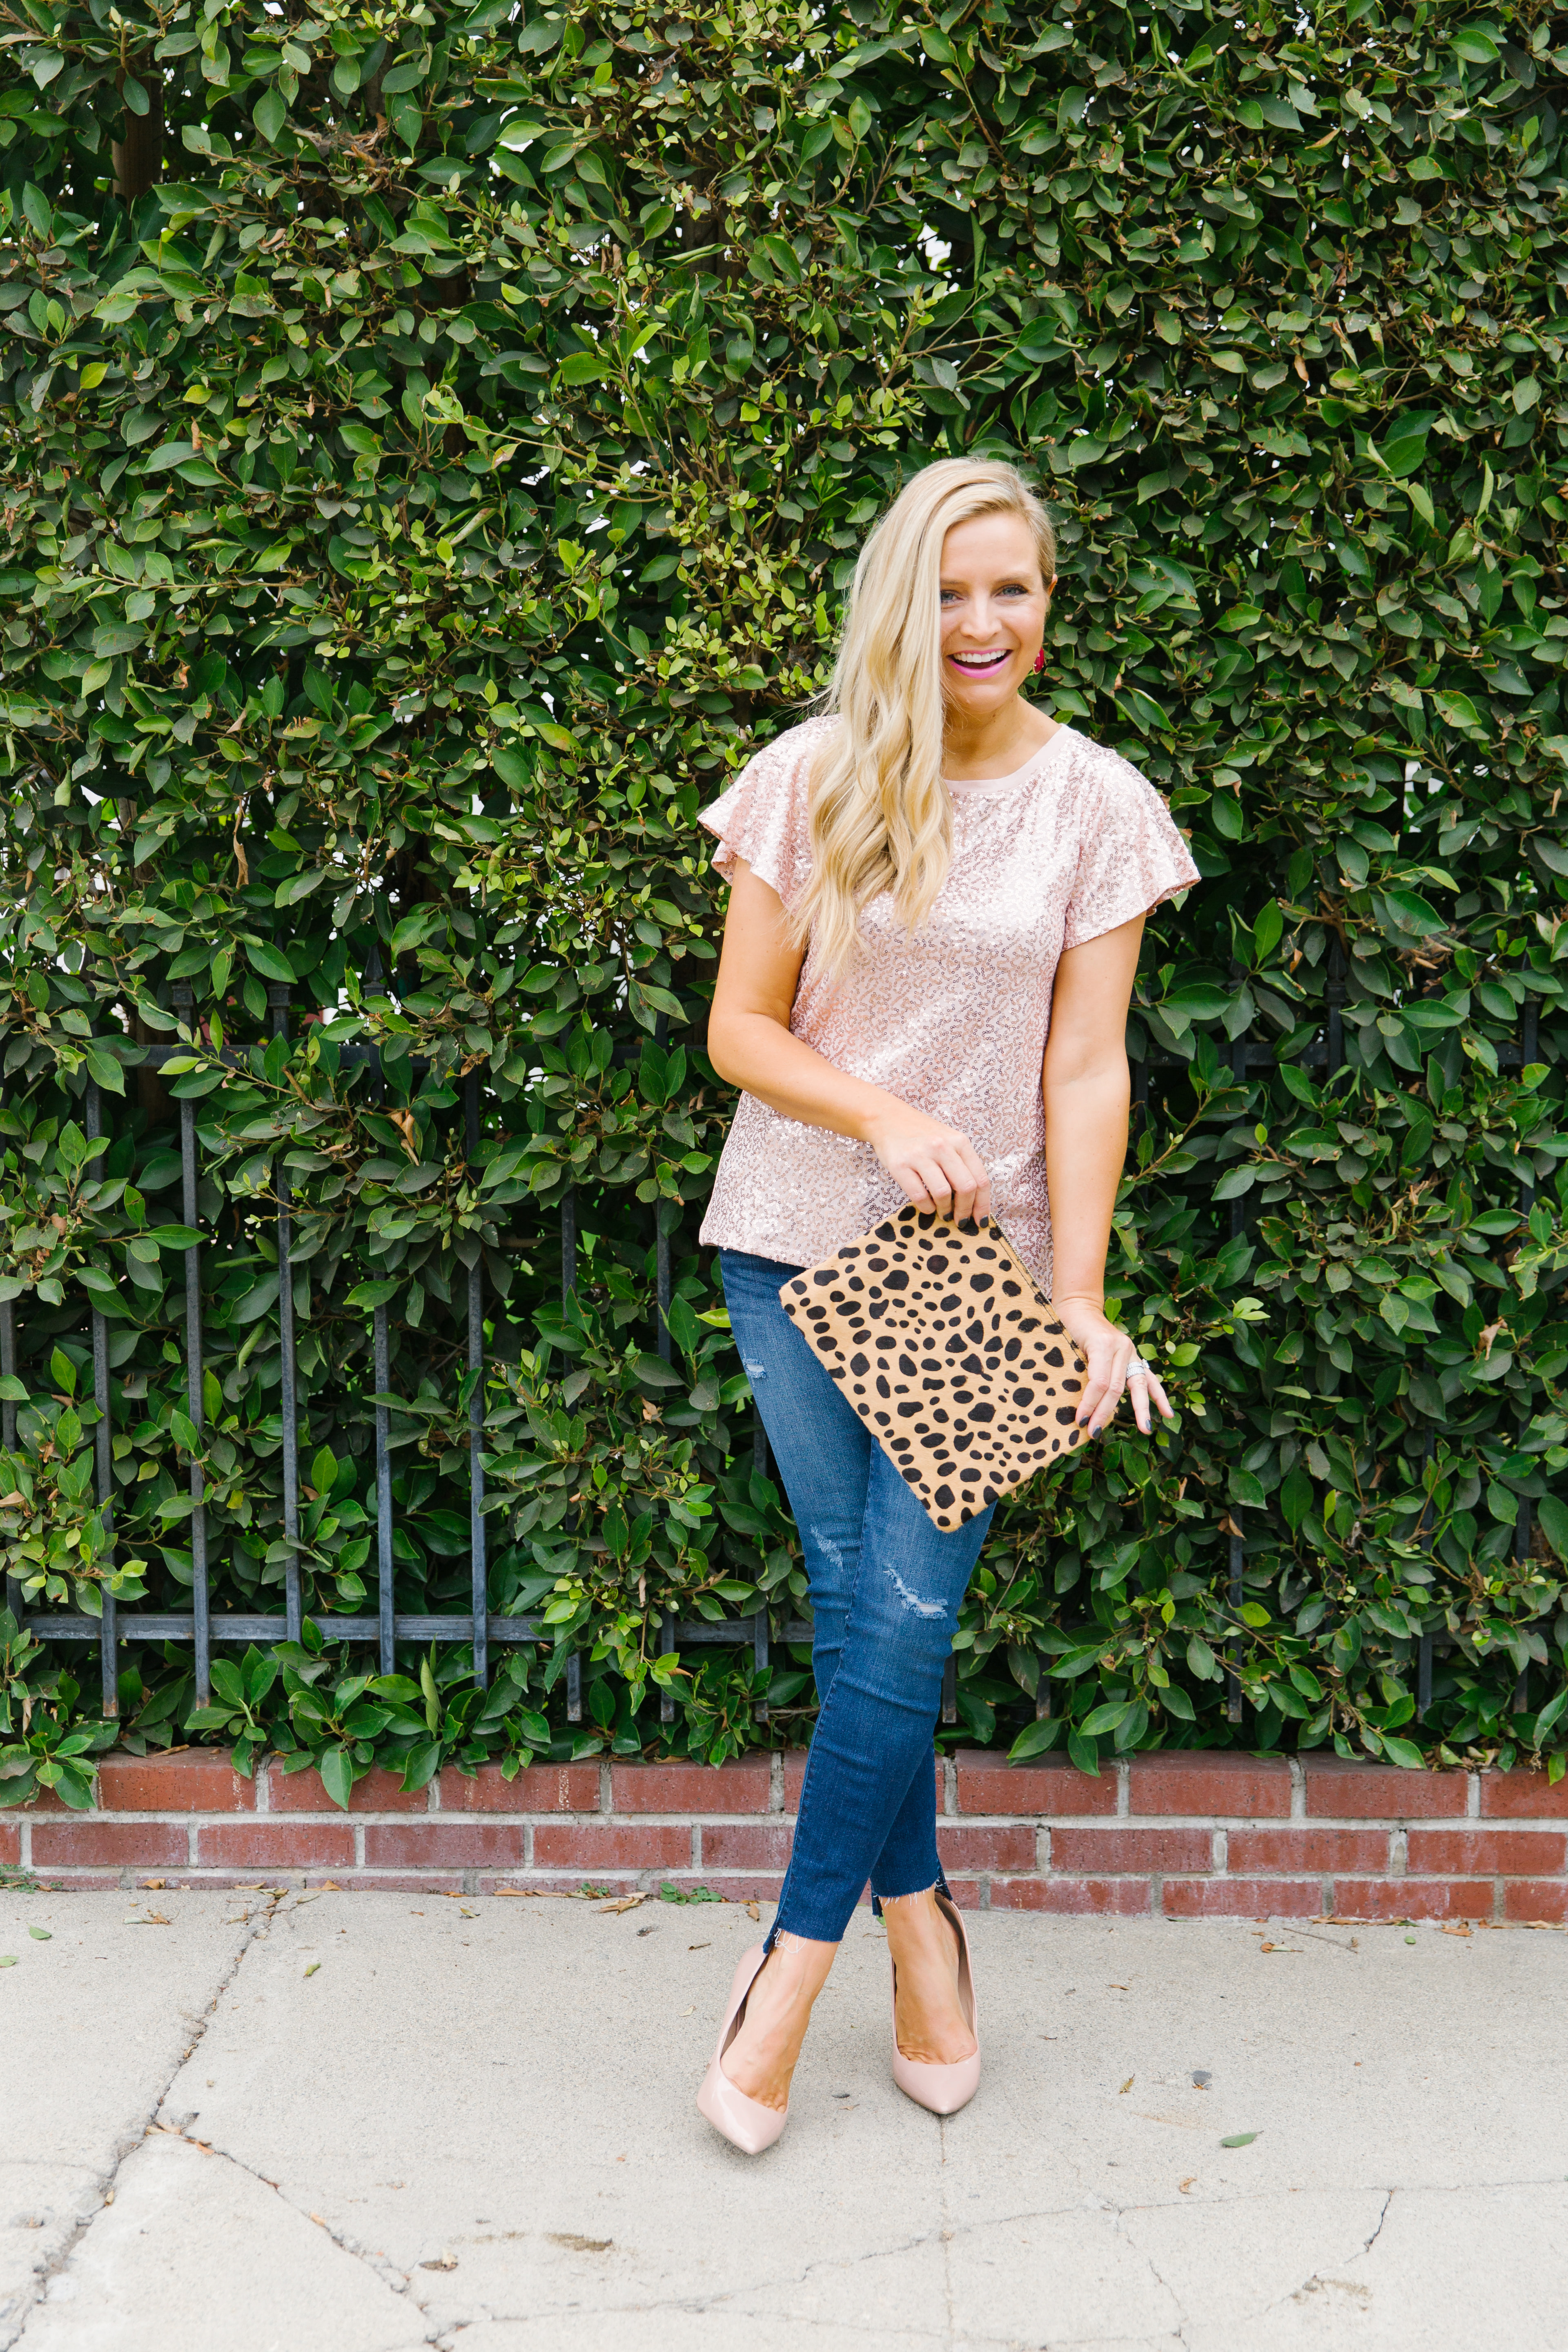 Gibson x Glam Collection Outfits featured by top Houston fashion blog, Fancy Ashley: a blonde woman walking wearing sequin flutter sleeves top, jeans, leopard clutch and pink heels